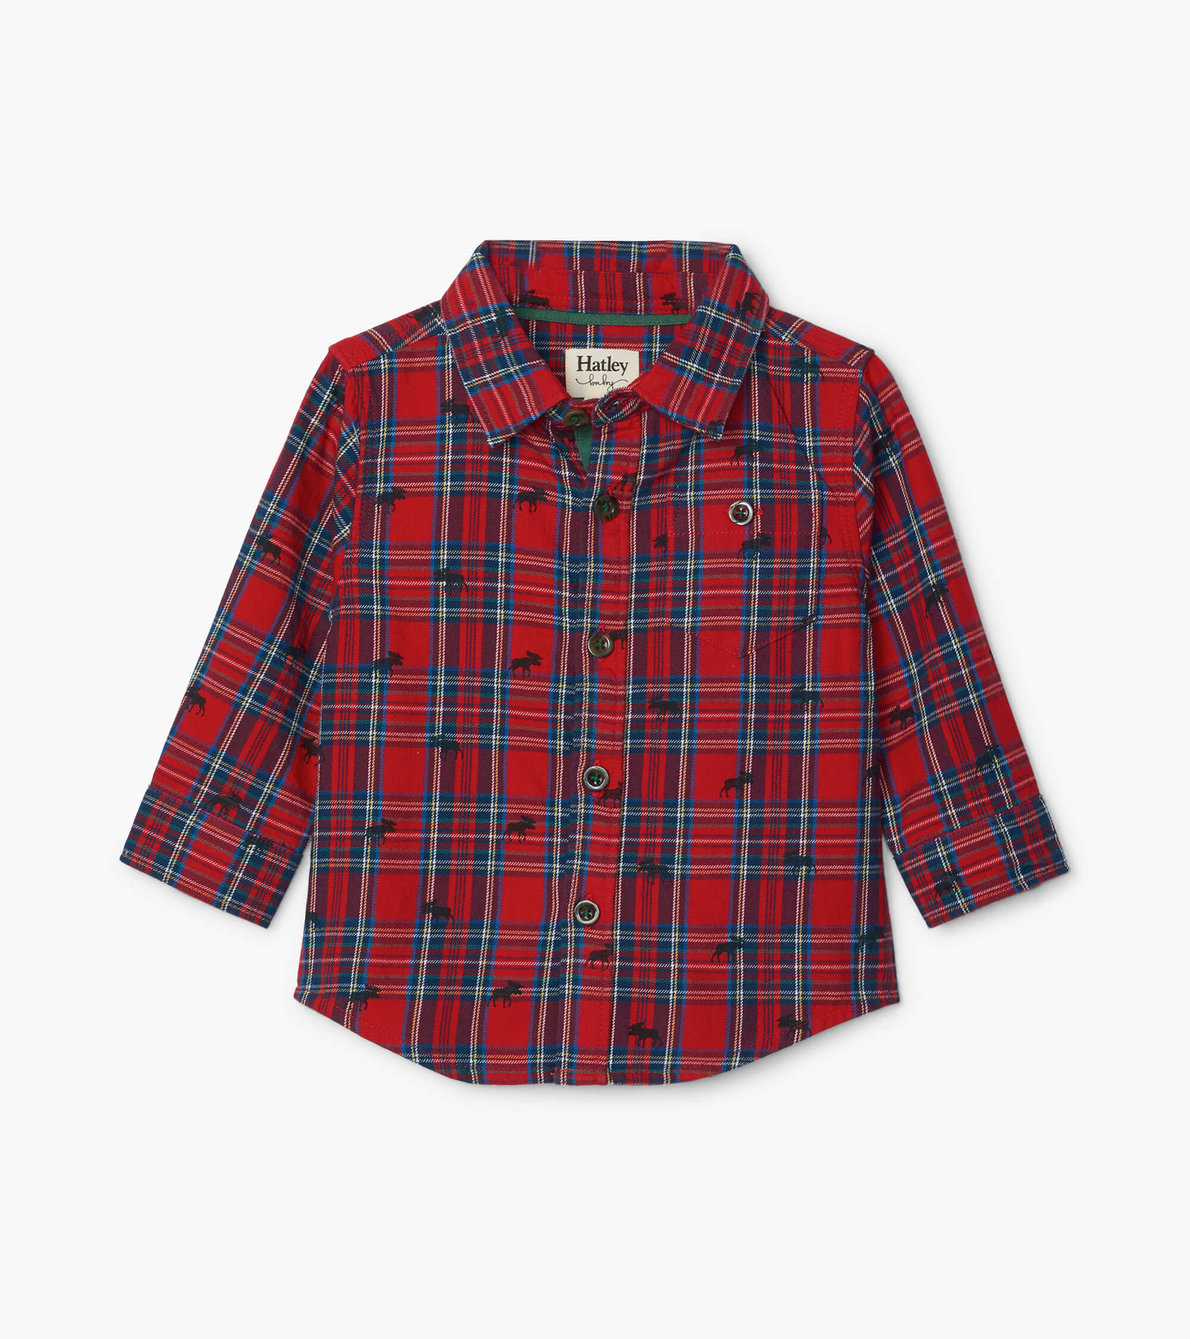 View larger image of Holiday Plaid Moose Baby Button Down Shirt